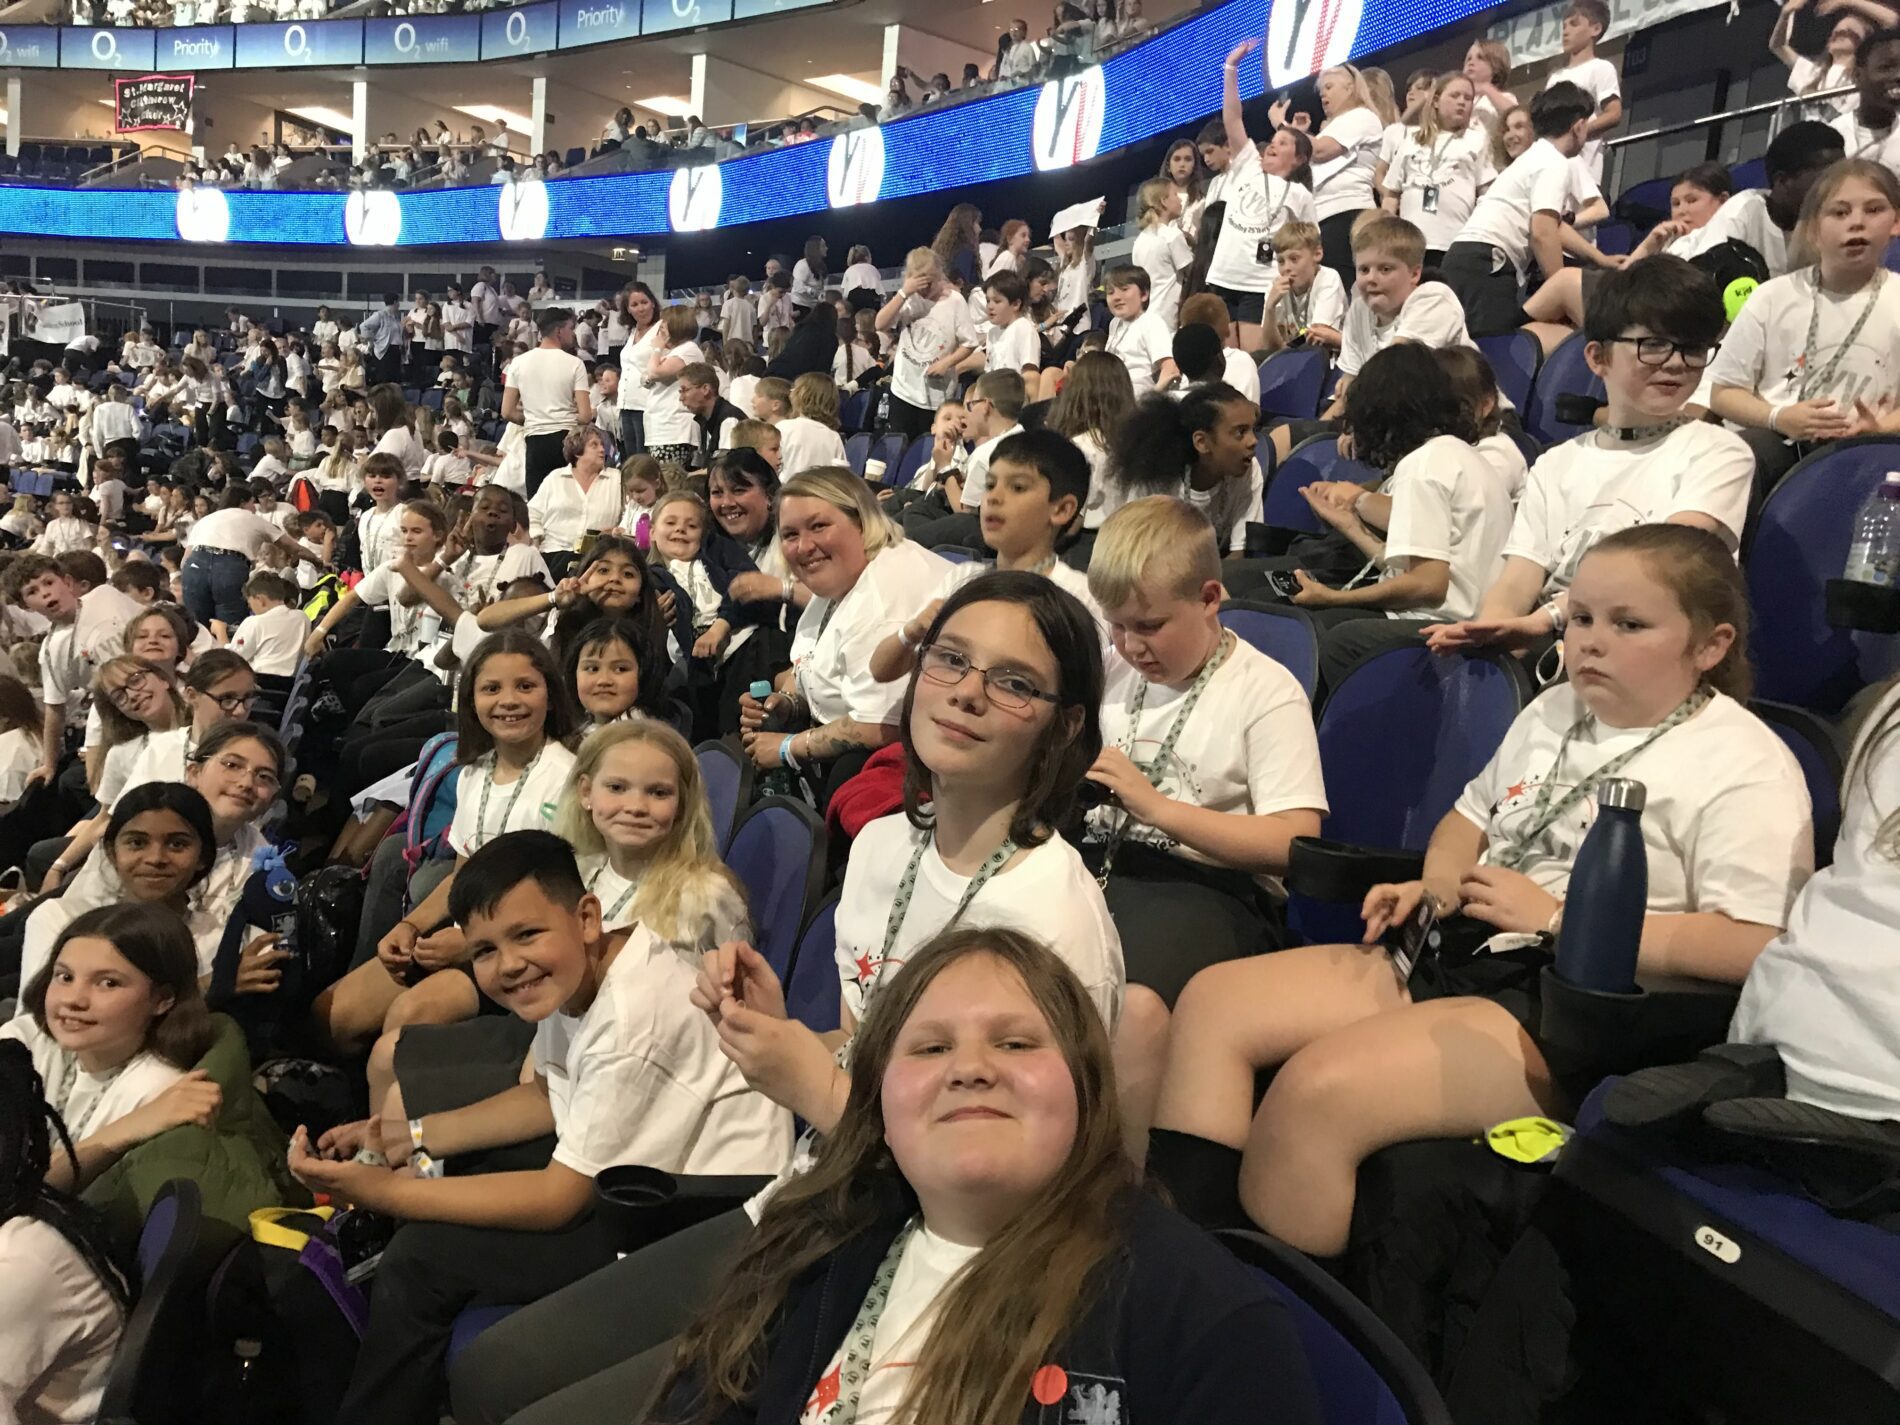 rosherville cofe academy performed at o2 young voices